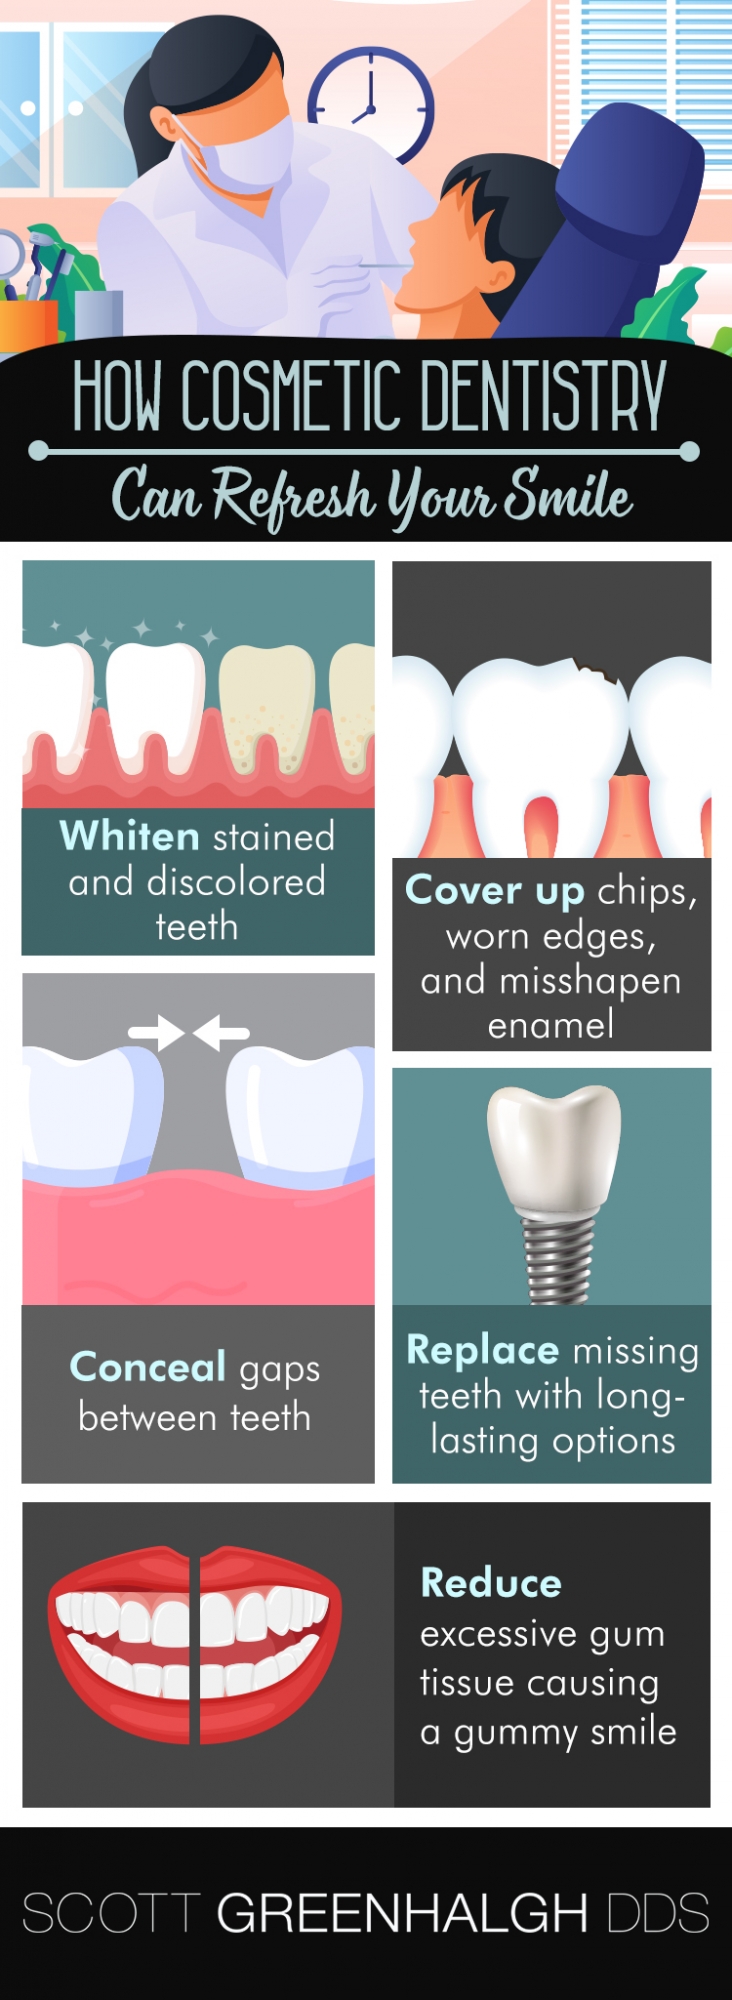 An infographic showing how cosmetic dentistry can refresh your smile